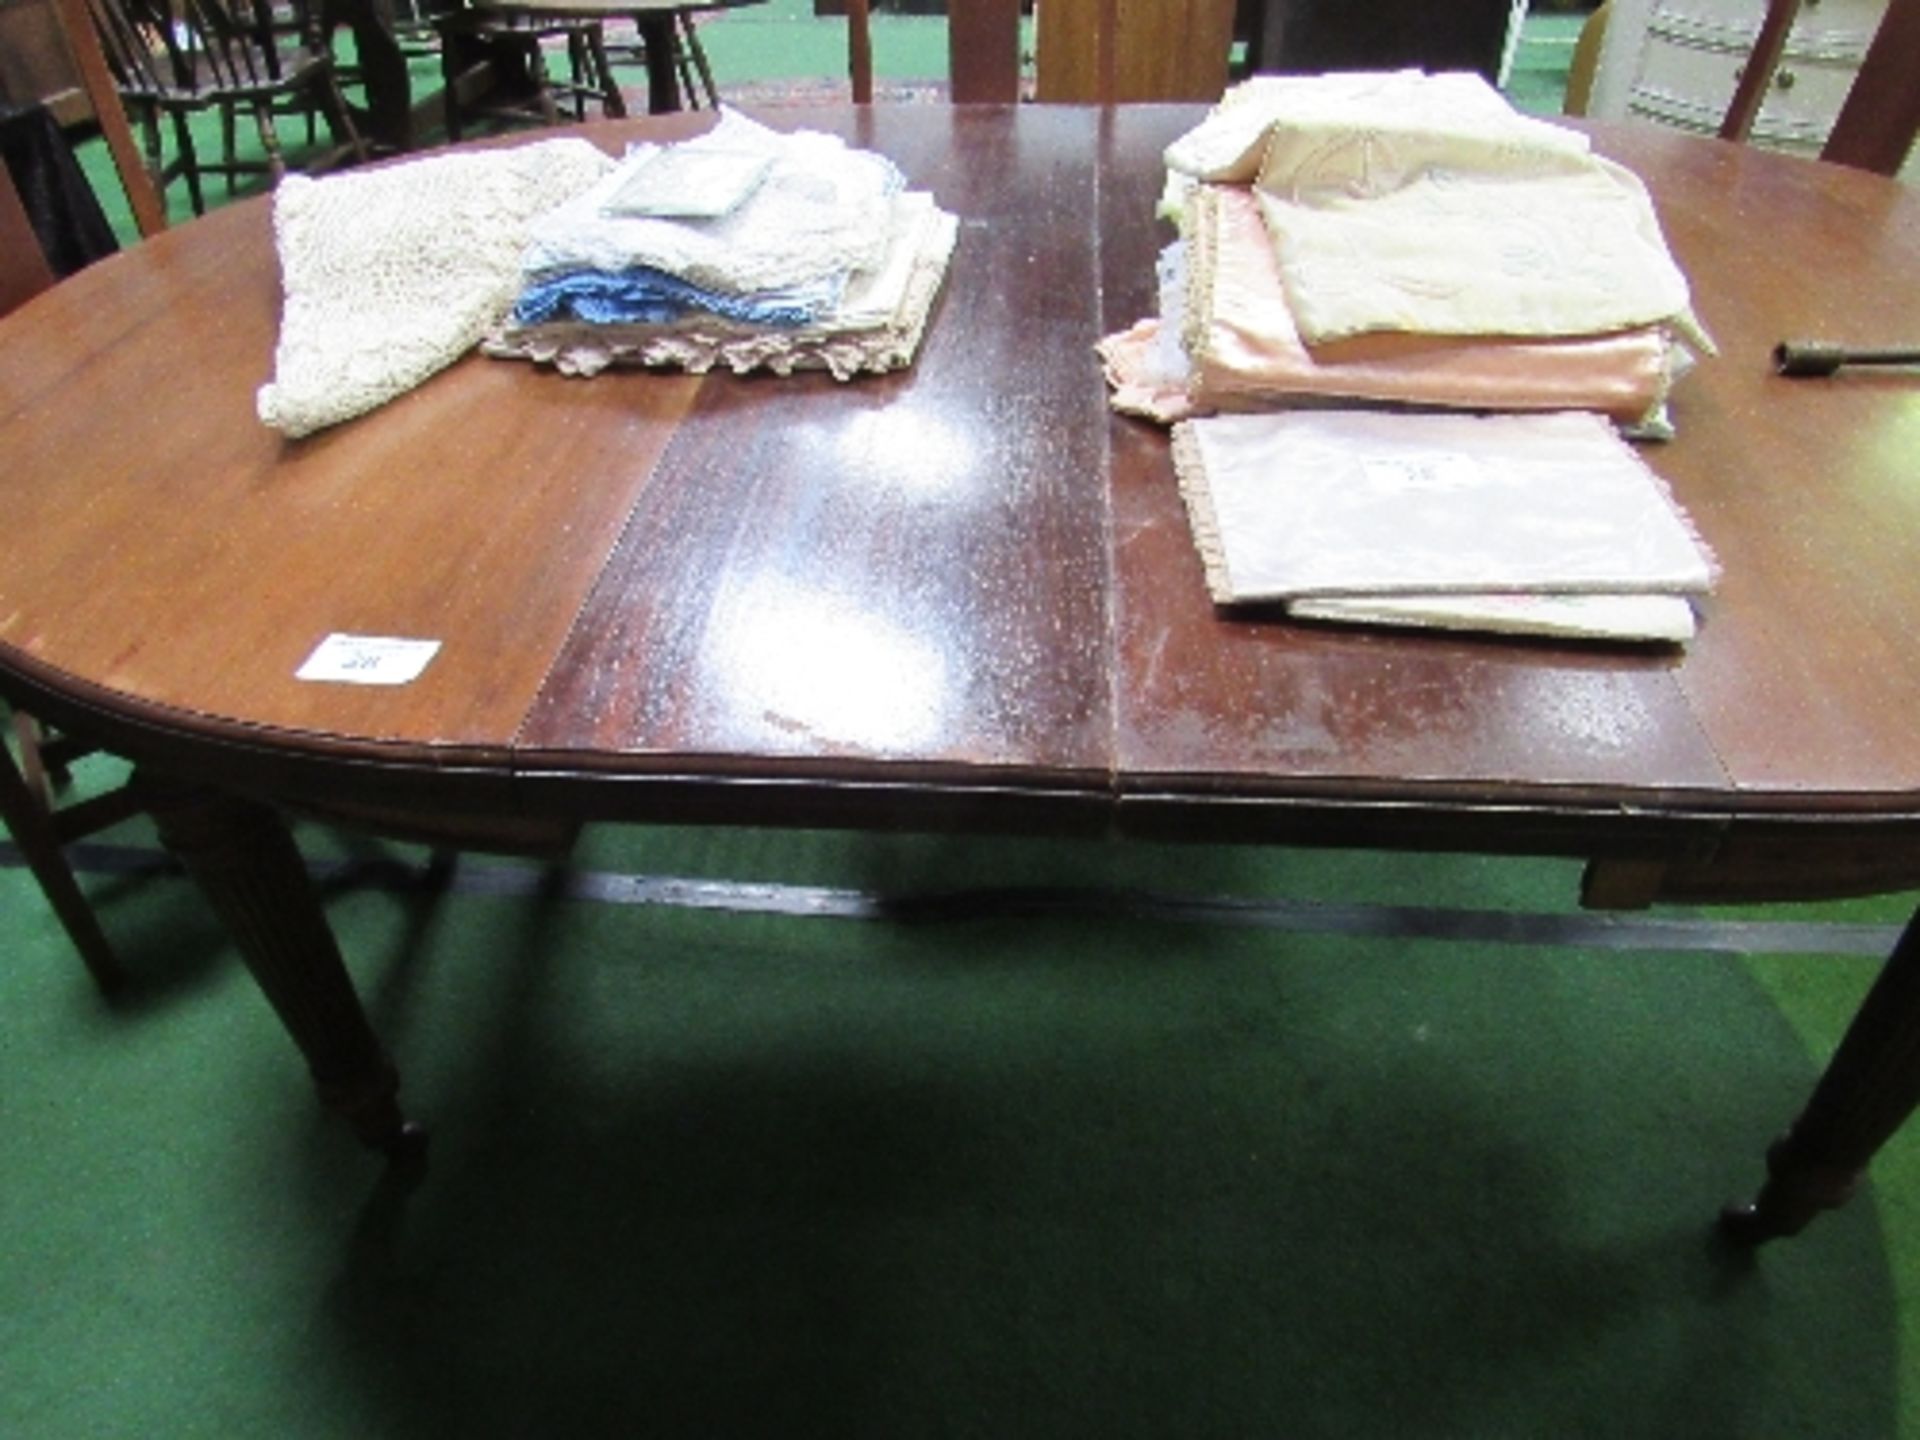 Mahogany Edwardian wind-out dining table c/w 2 leaves, on reeded turned legs to casters c/w - Image 2 of 2